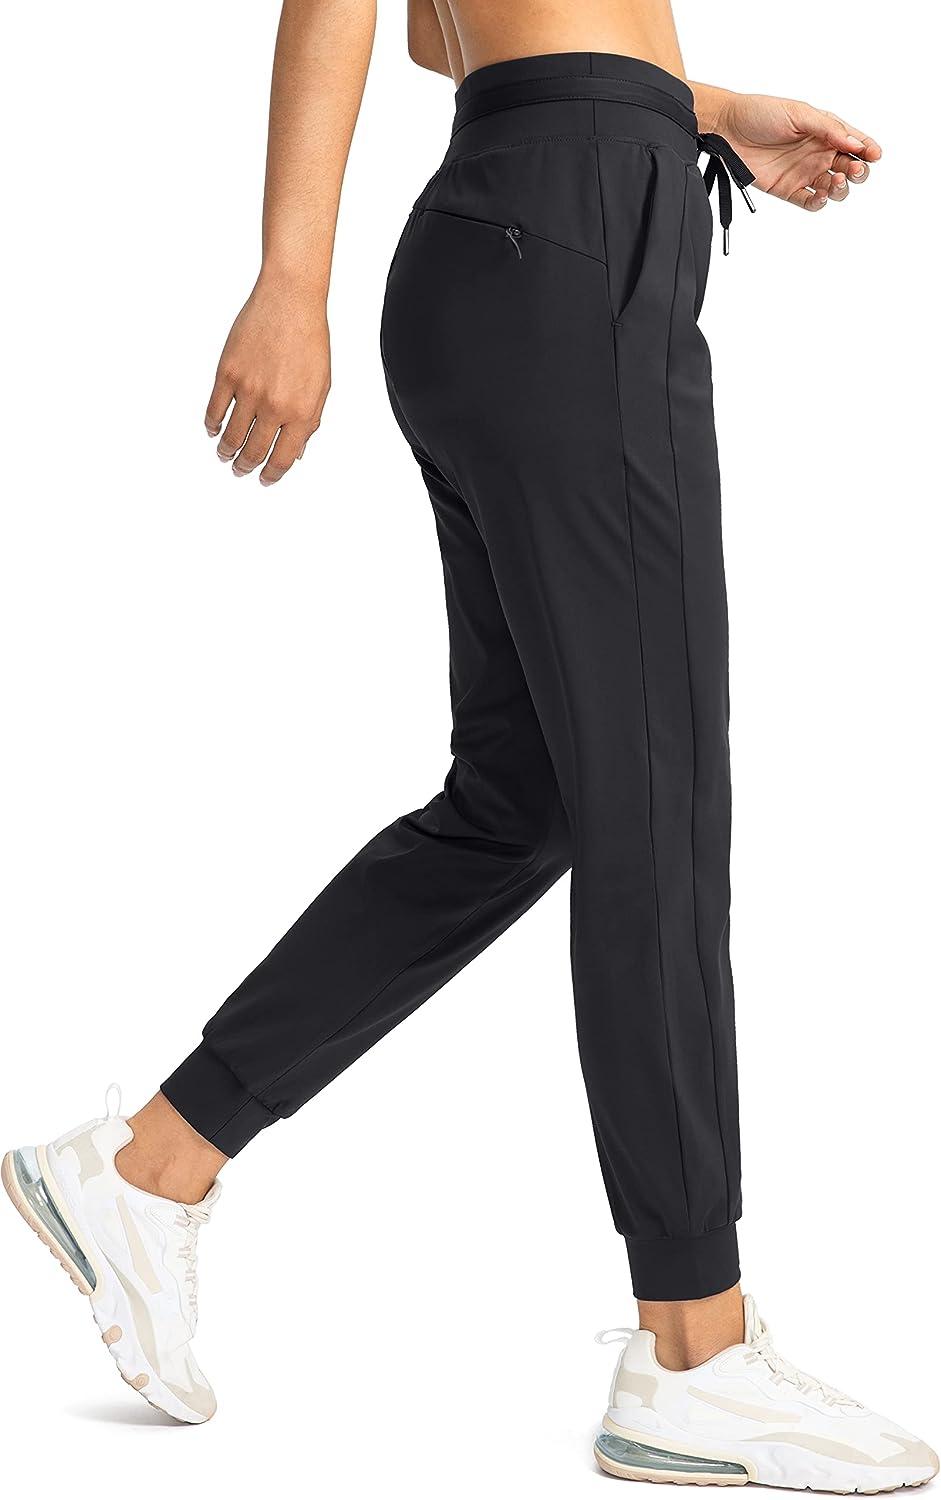 G Gradual Women's Joggers Pants with Zipper Pockets High Waisted Athletic Tapered  Sweatpants for Women Workout Lounge Black Medium